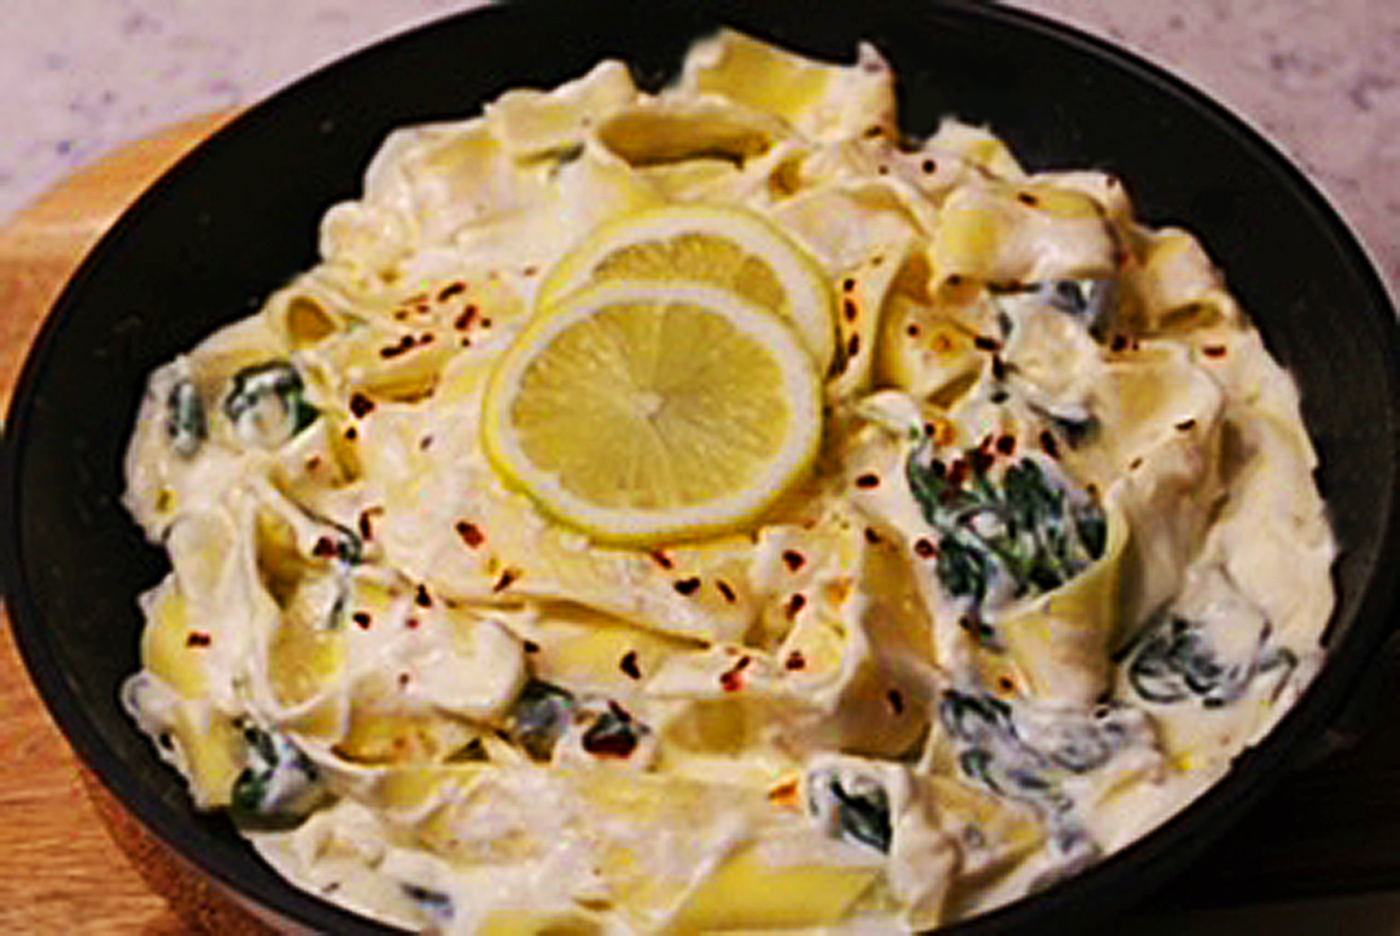 Pappardelle pasta sautéed with lemon ricotta sauce with spinach in a sauté pan w/ two lemon slices